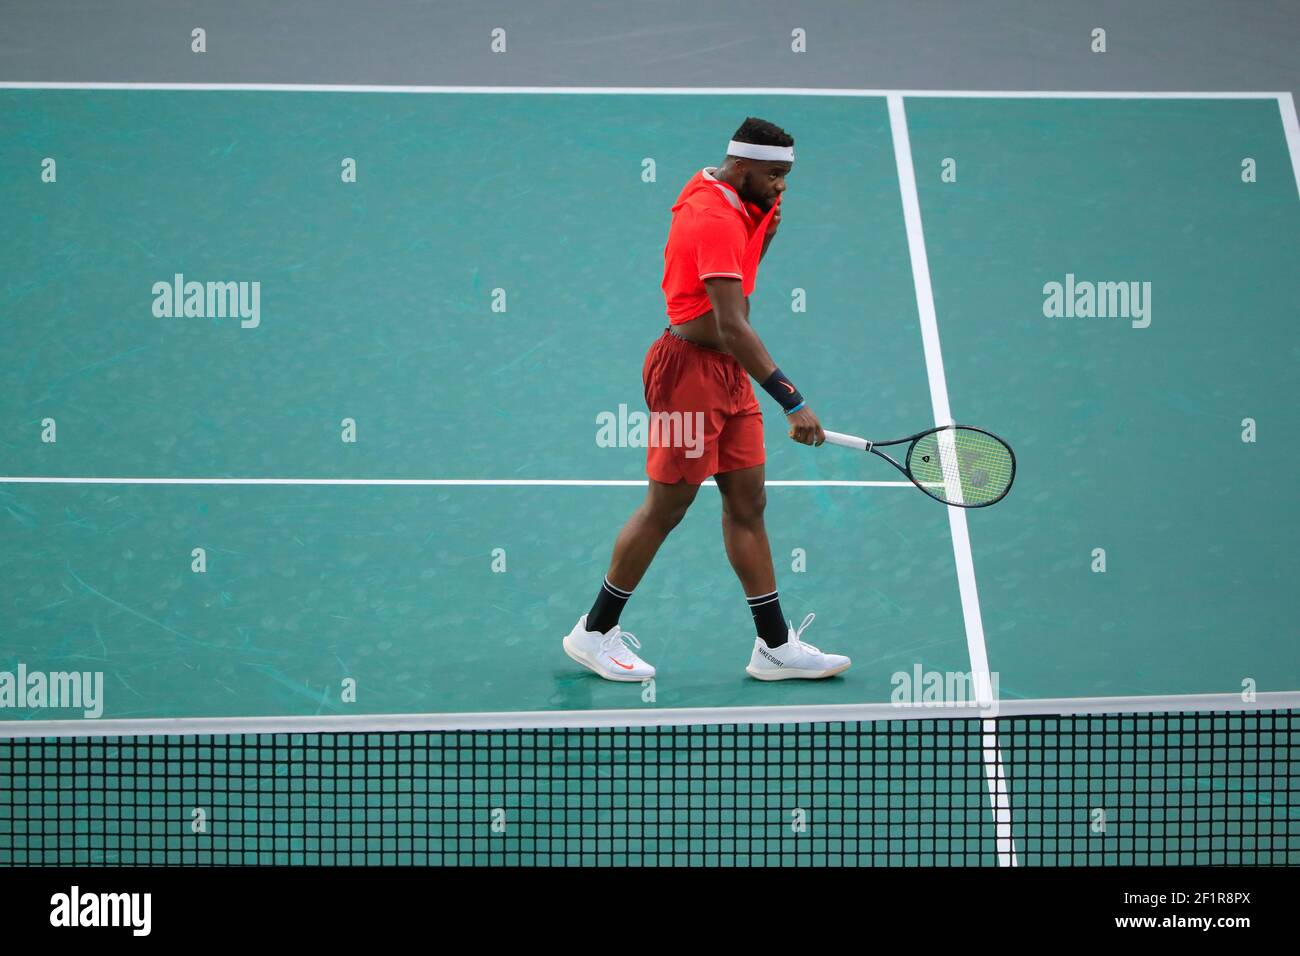 Frances Tiafoe (USA) won the game against Nicolas Mahut (FRA) during the  Rolex Paris Masters Paris 2018, Masters 1000 ATP World Tour, Tennis match  on October 29th, 2018 at AccorHotels Arena (Bercy)